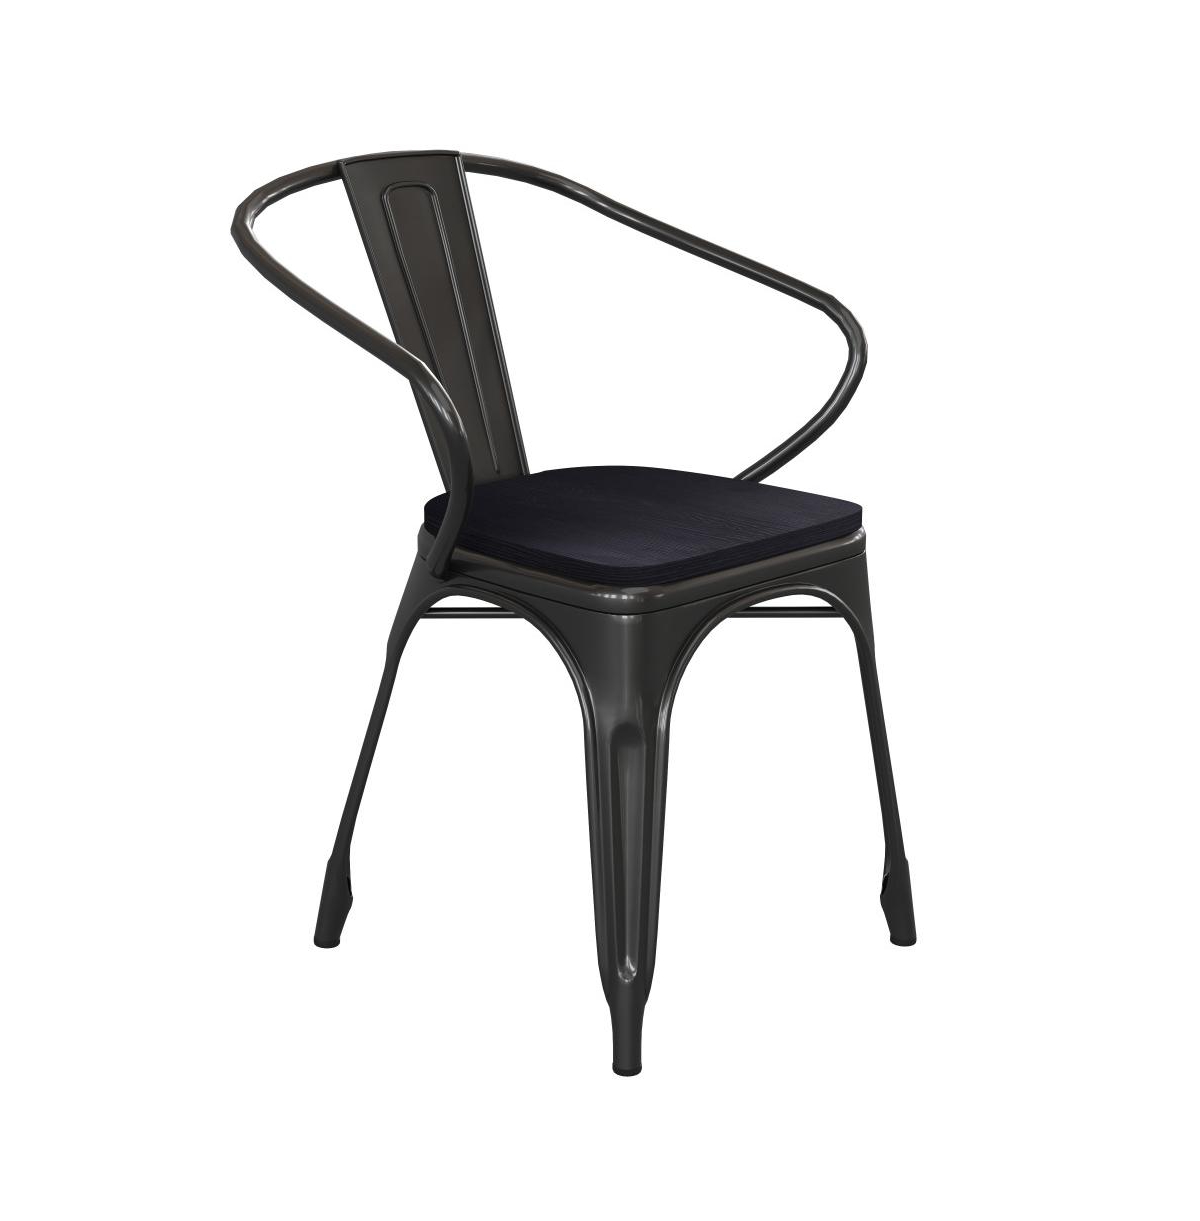 Emma+oliver Alva Metal Indoor-outdoor Stacking Chair With Vertical Slat Back, Arms And All-weather Polystyrene S In Black,black